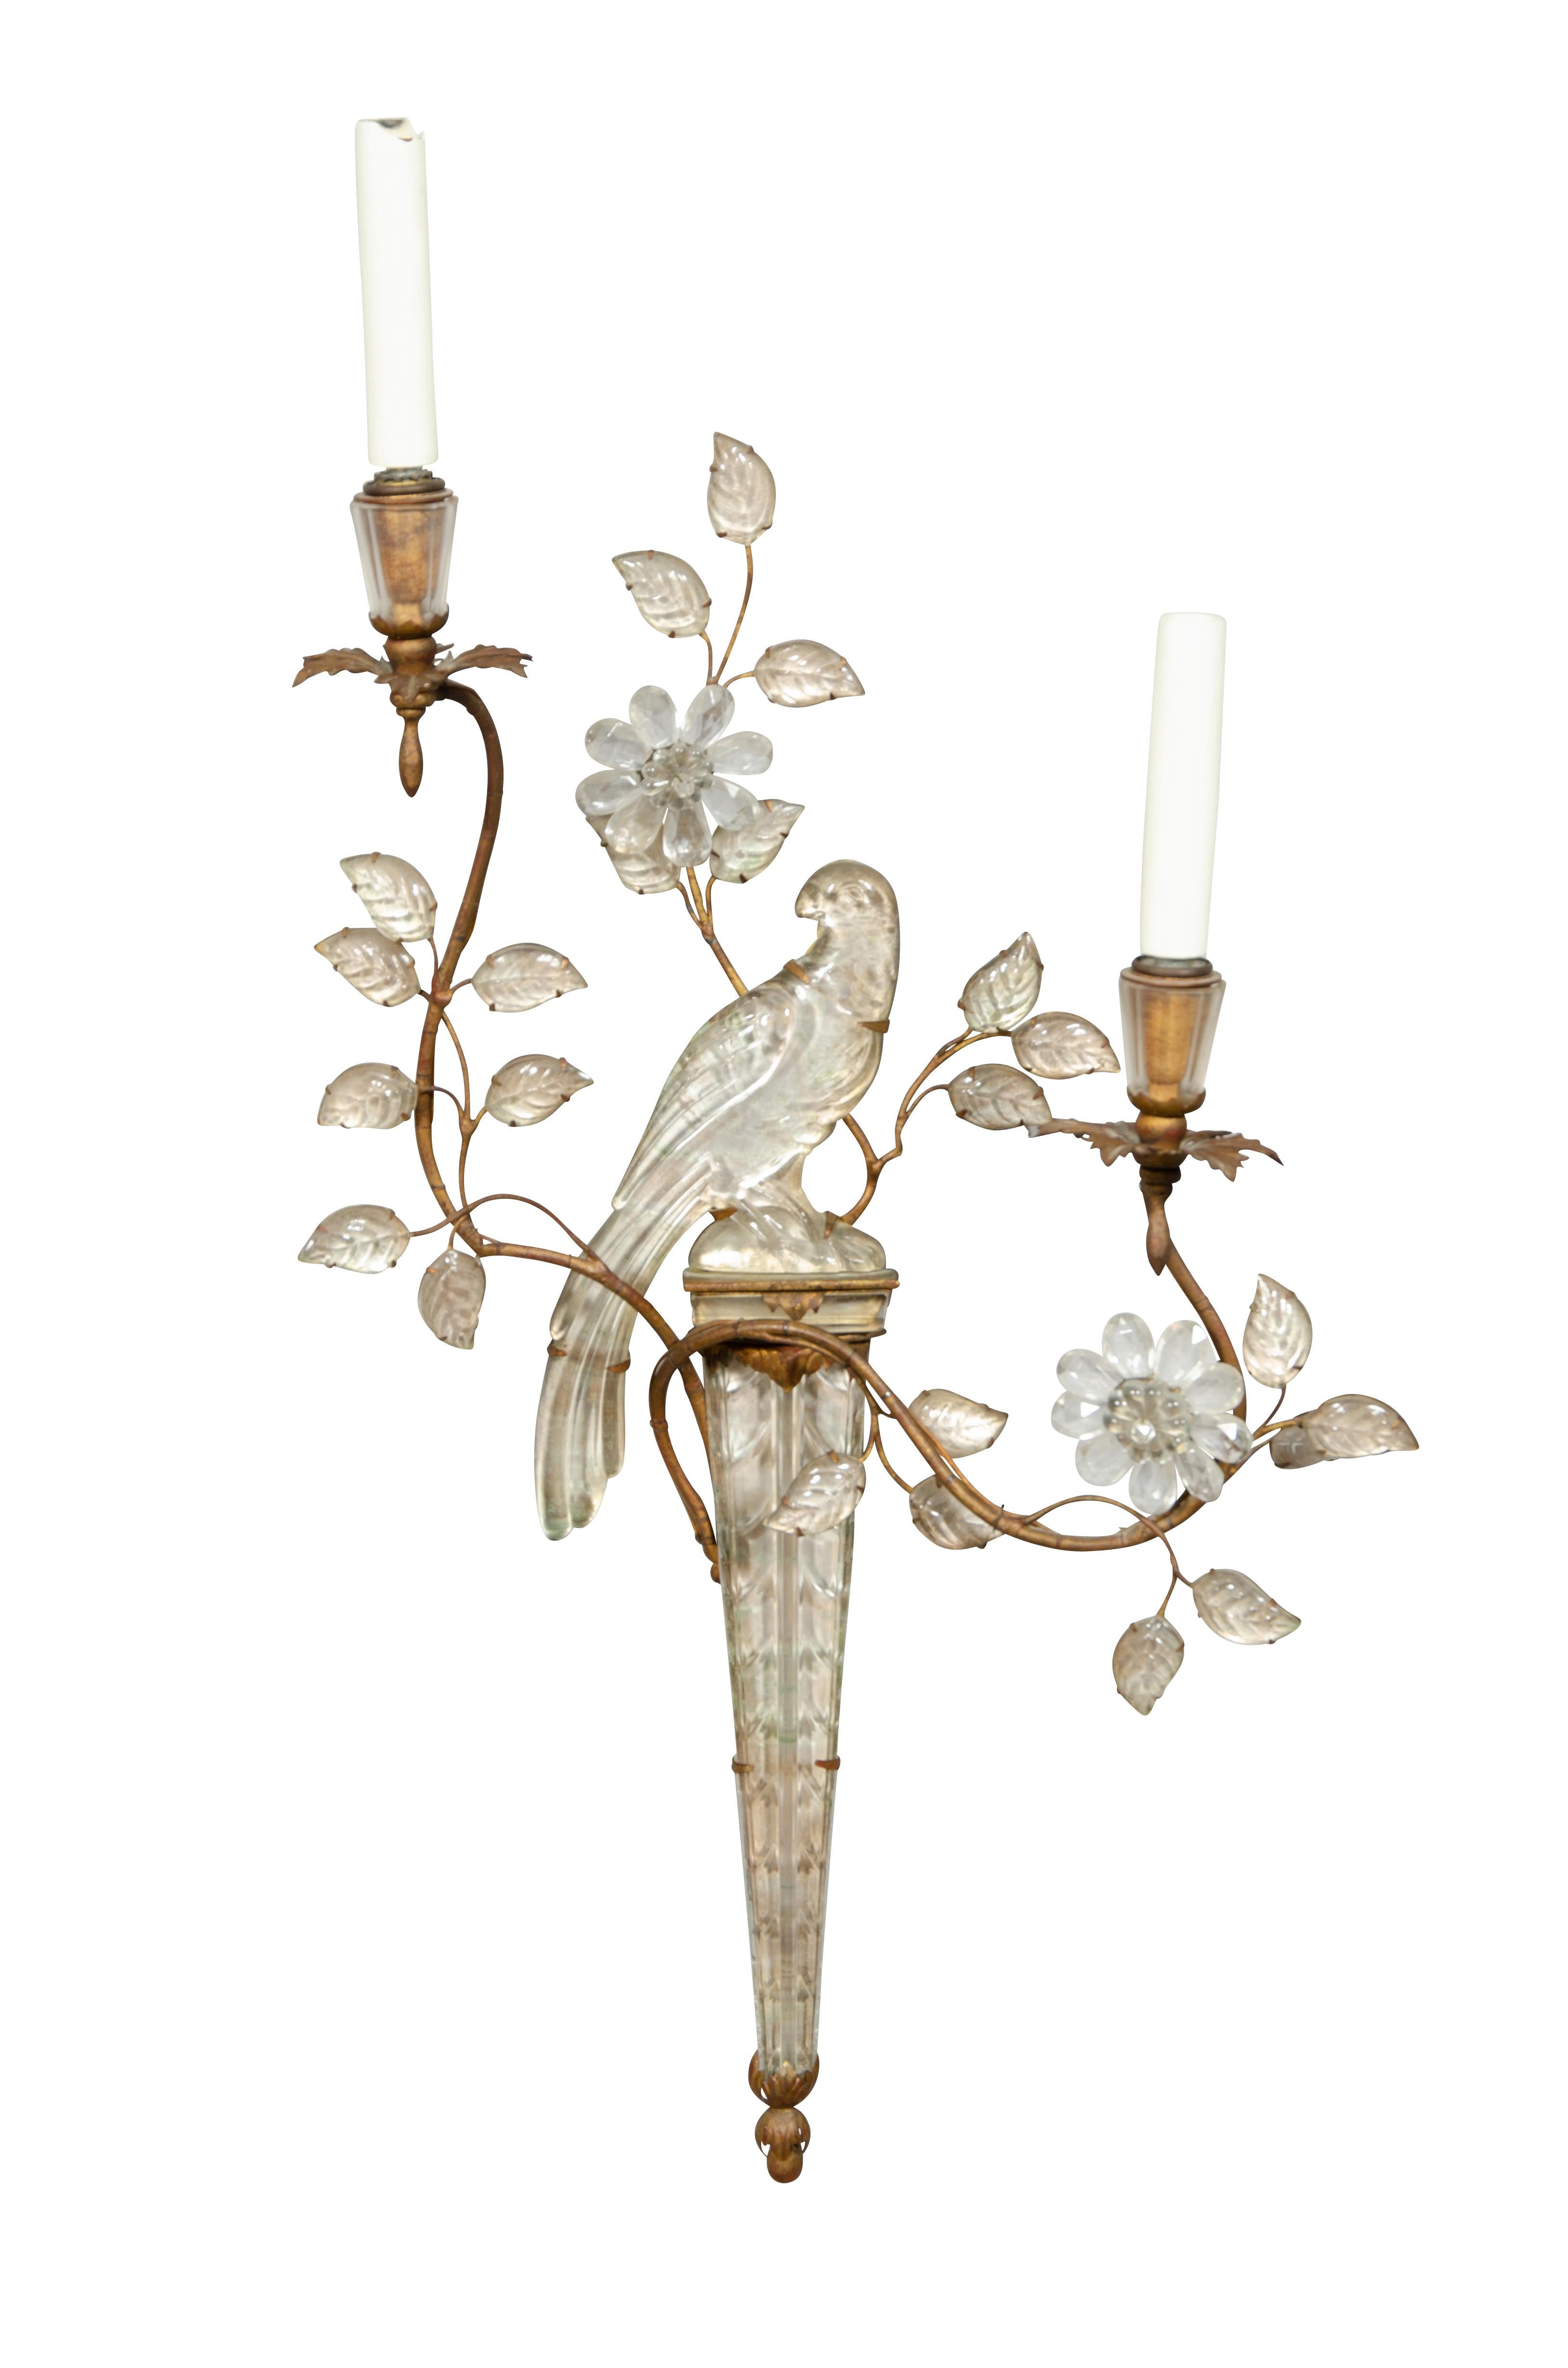 A great pair of the most sought after Bagues sconce design. In great condition with great patina and present very well. Two arm with central bird.